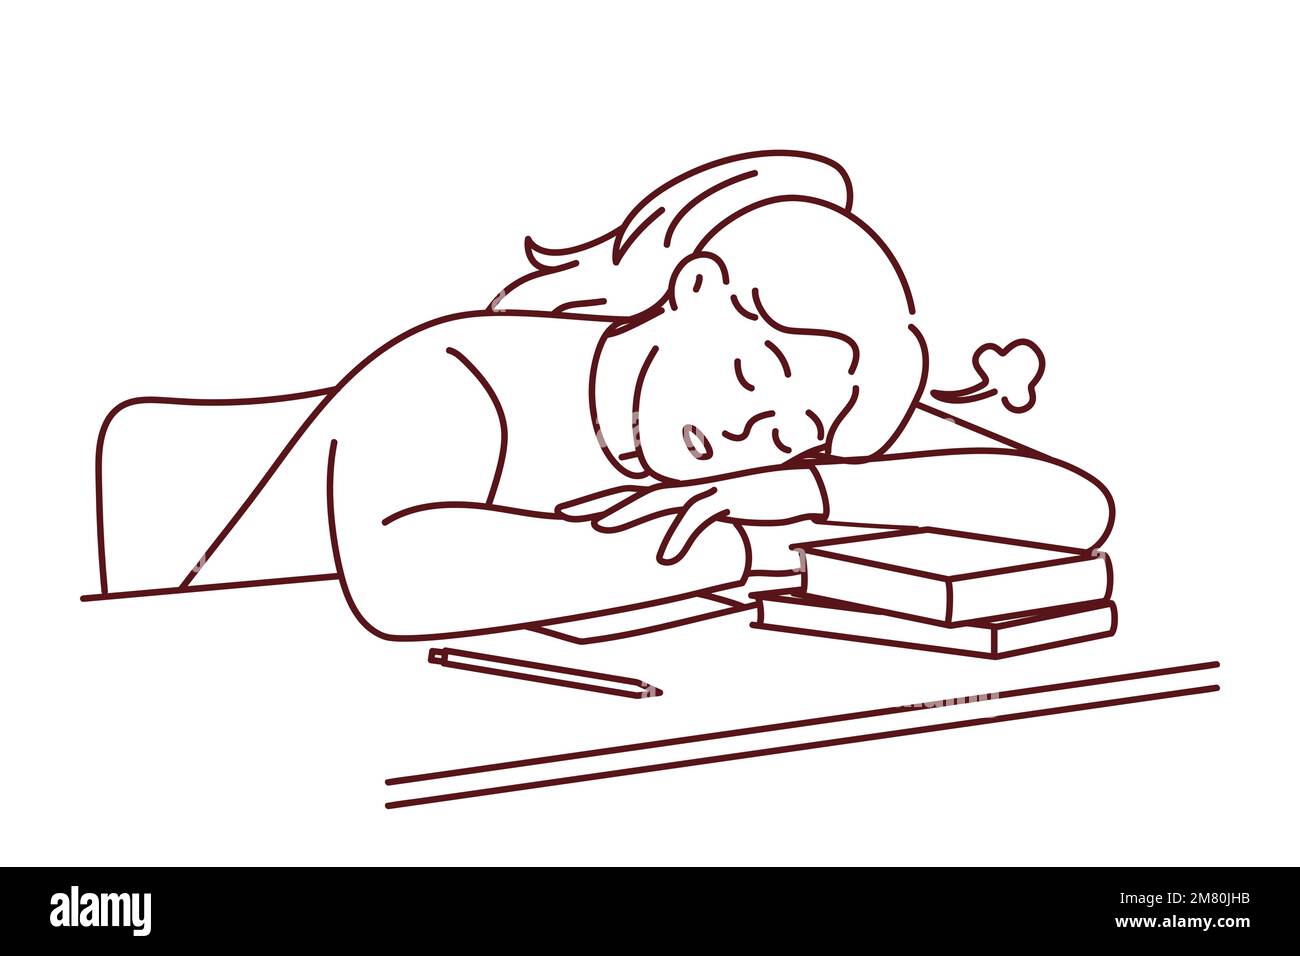 Tired young female student fall asleep on desk distressed with studying. Exhausted girl sleep on table suffer from exhaustion and fatigue learning. Vector illustration.  Stock Vector